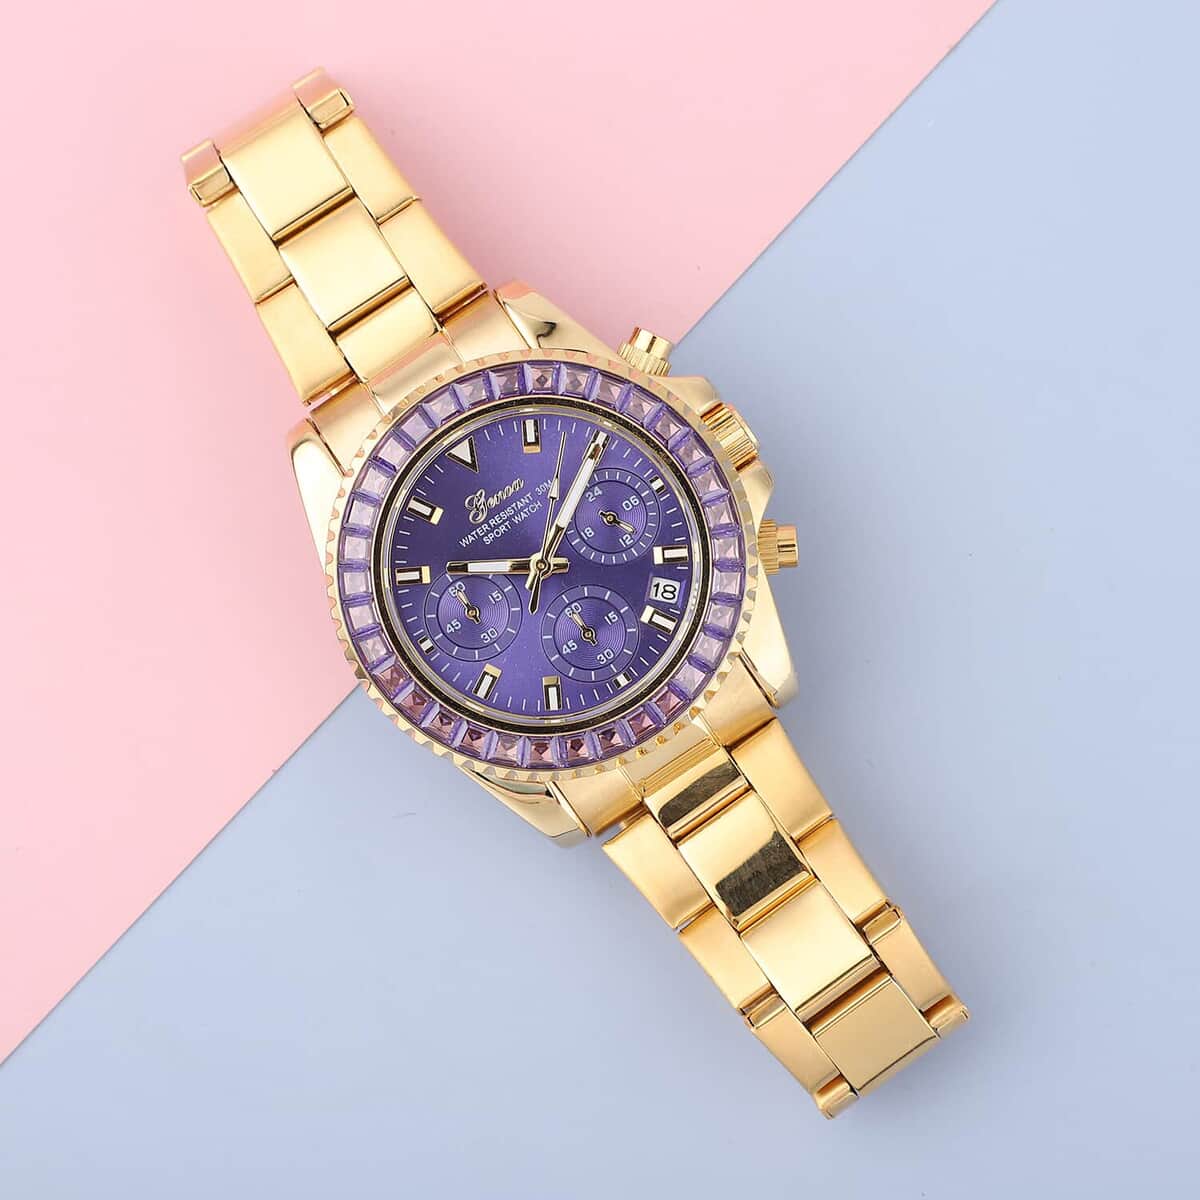 Genoa Finest Purple CZ Multi-Function Movement Watch, ION Plated Yellow Gold Stainless Steel Watch, Formal Bracelet Watch, Best Everyday Luxury Minimal Women's Watch, Analogue Watches 38mm 5.75 ctw image number 1